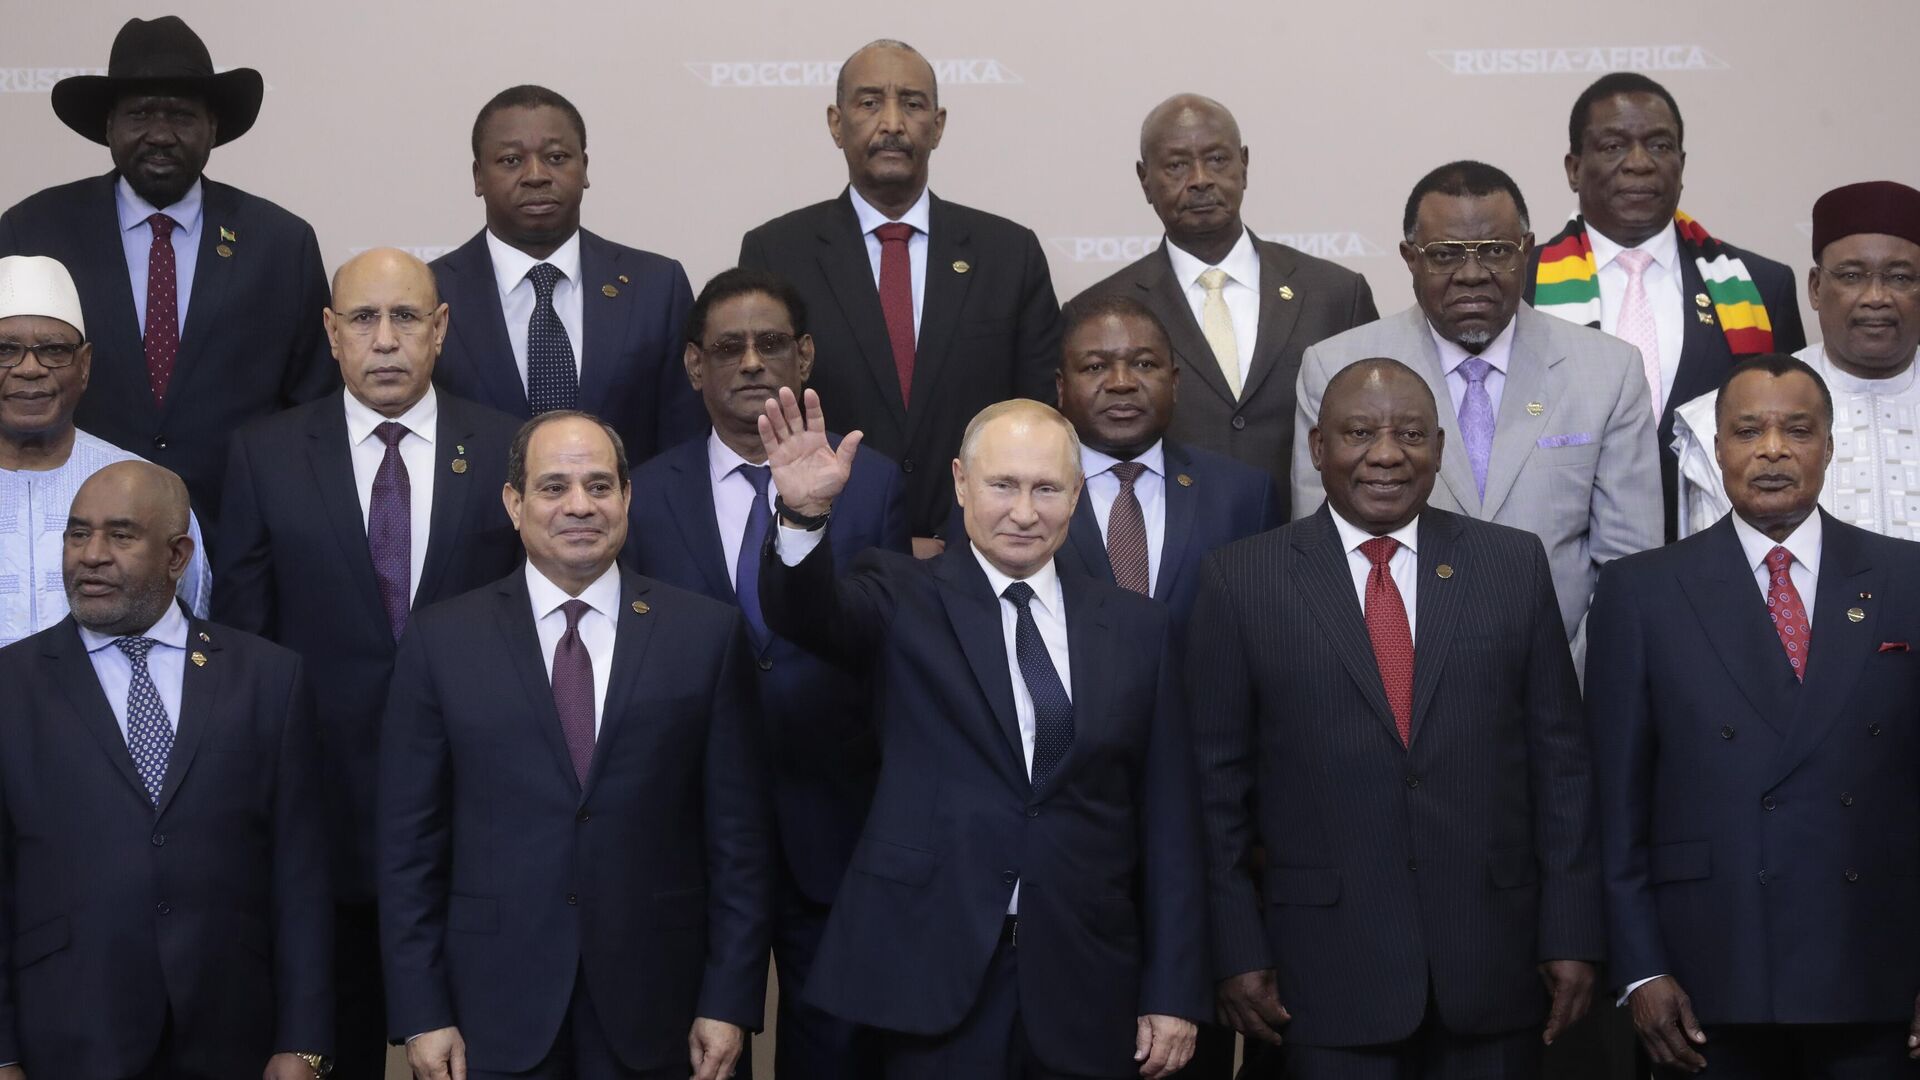 Russian President Vladimir Putin, center, poses for a photo with leaders of African countries at the Russia-Africa summit in the Black Sea resort of Sochi, Russia, on Oct. 24, 2019.  - Sputnik International, 1920, 10.02.2023